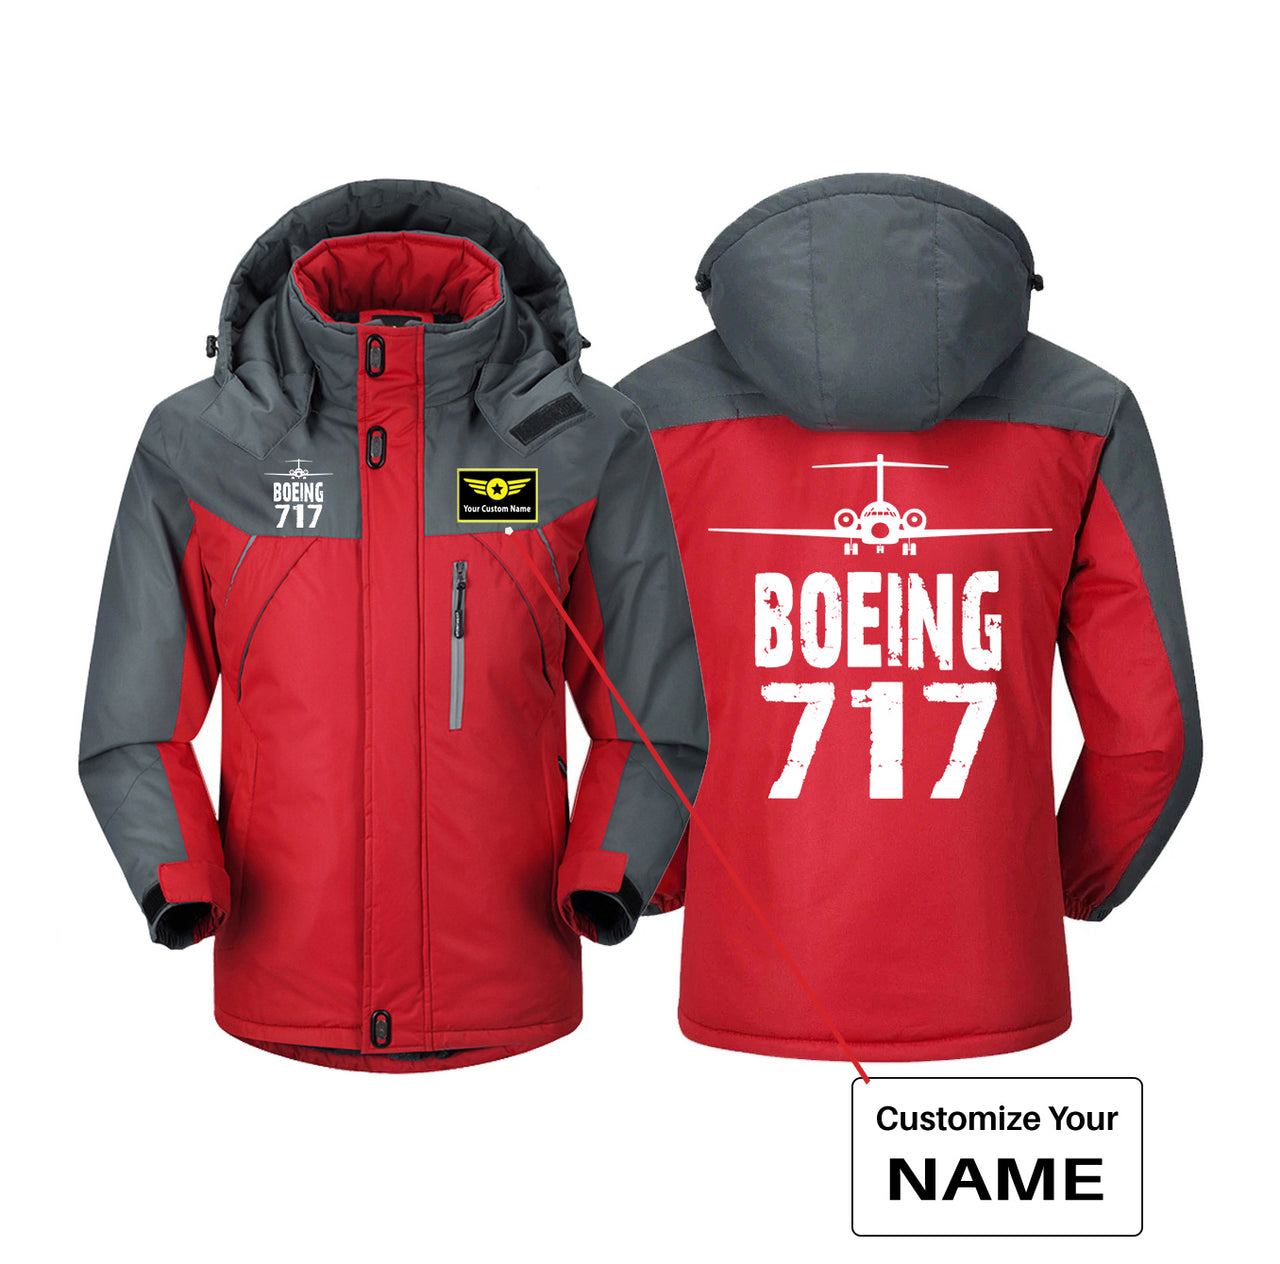 Boeing 717 & Plane Designed Thick Winter Jackets